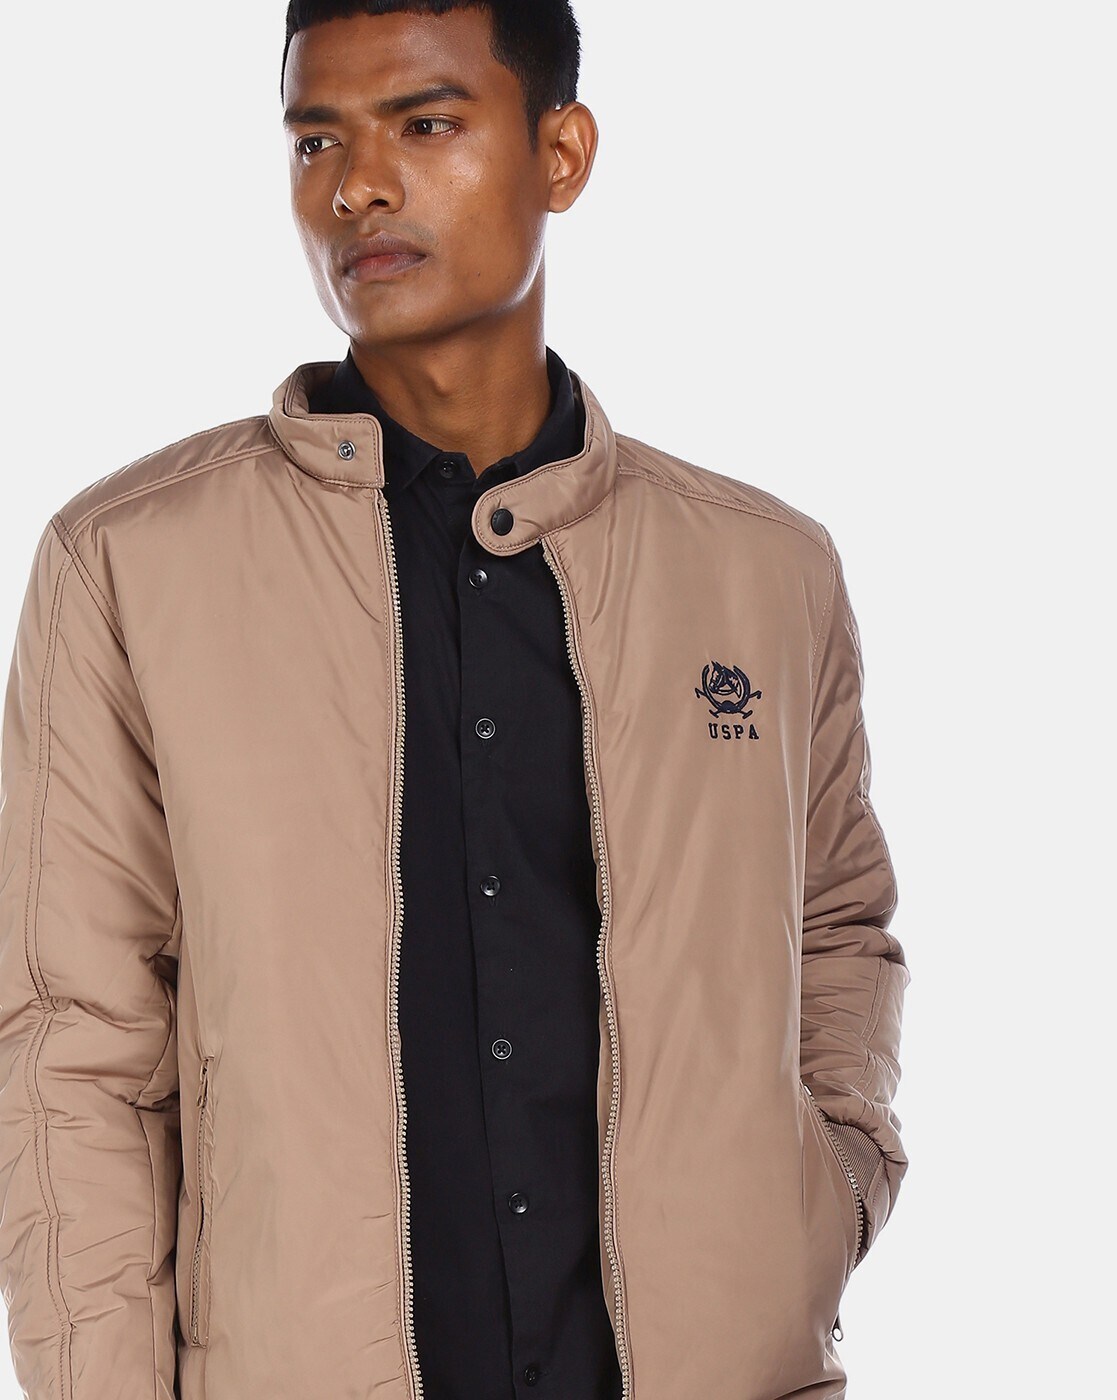 Buy Us Polo Assn Jacket Online In India - Etsy India